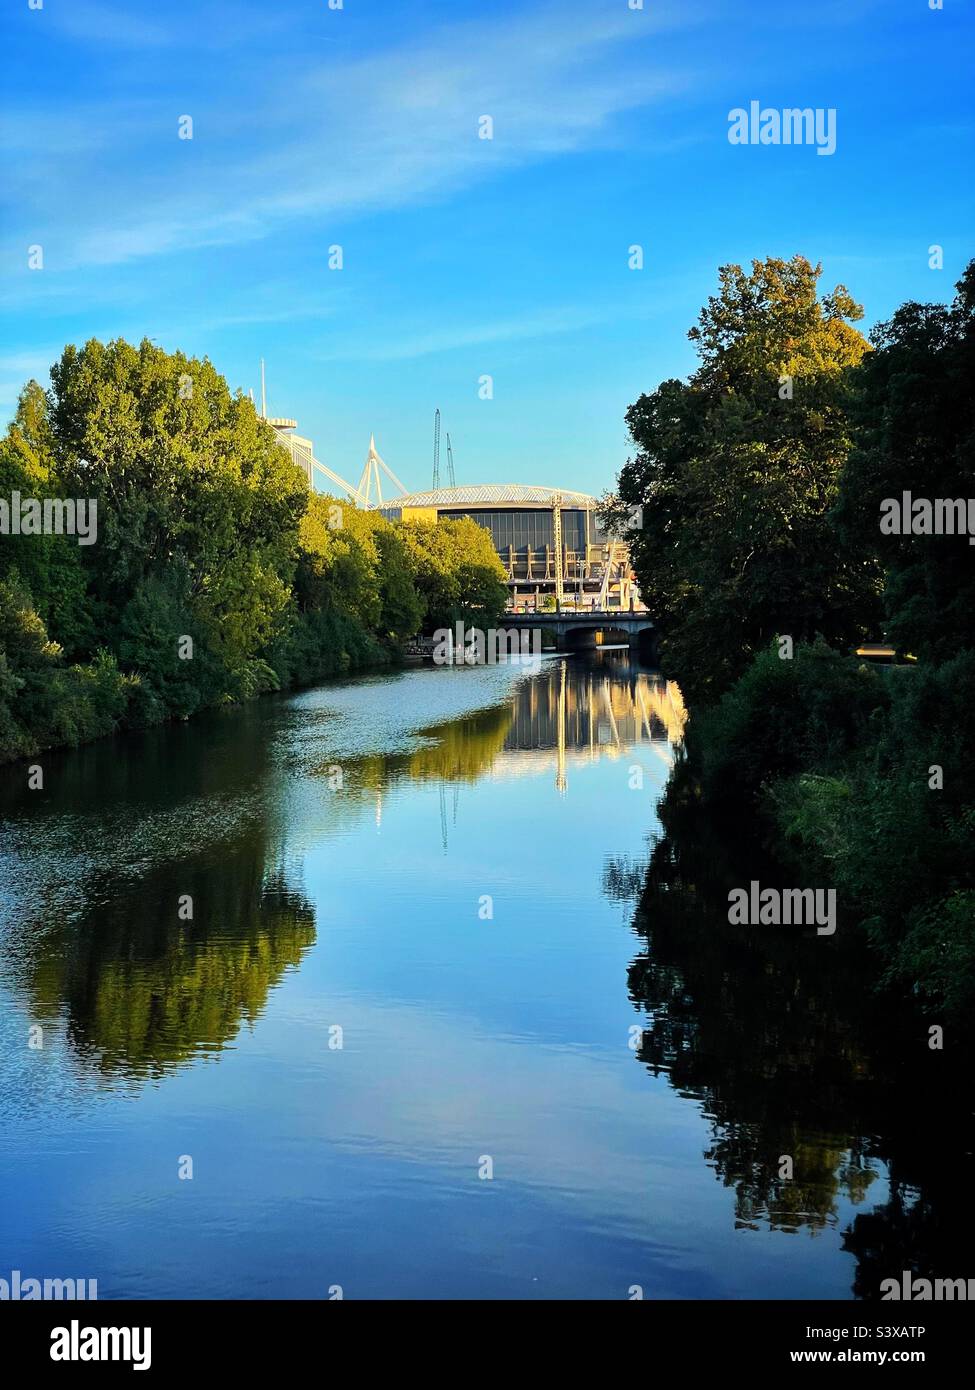 The Principality Stadium reflected in the River Taff, September. Stock Photo